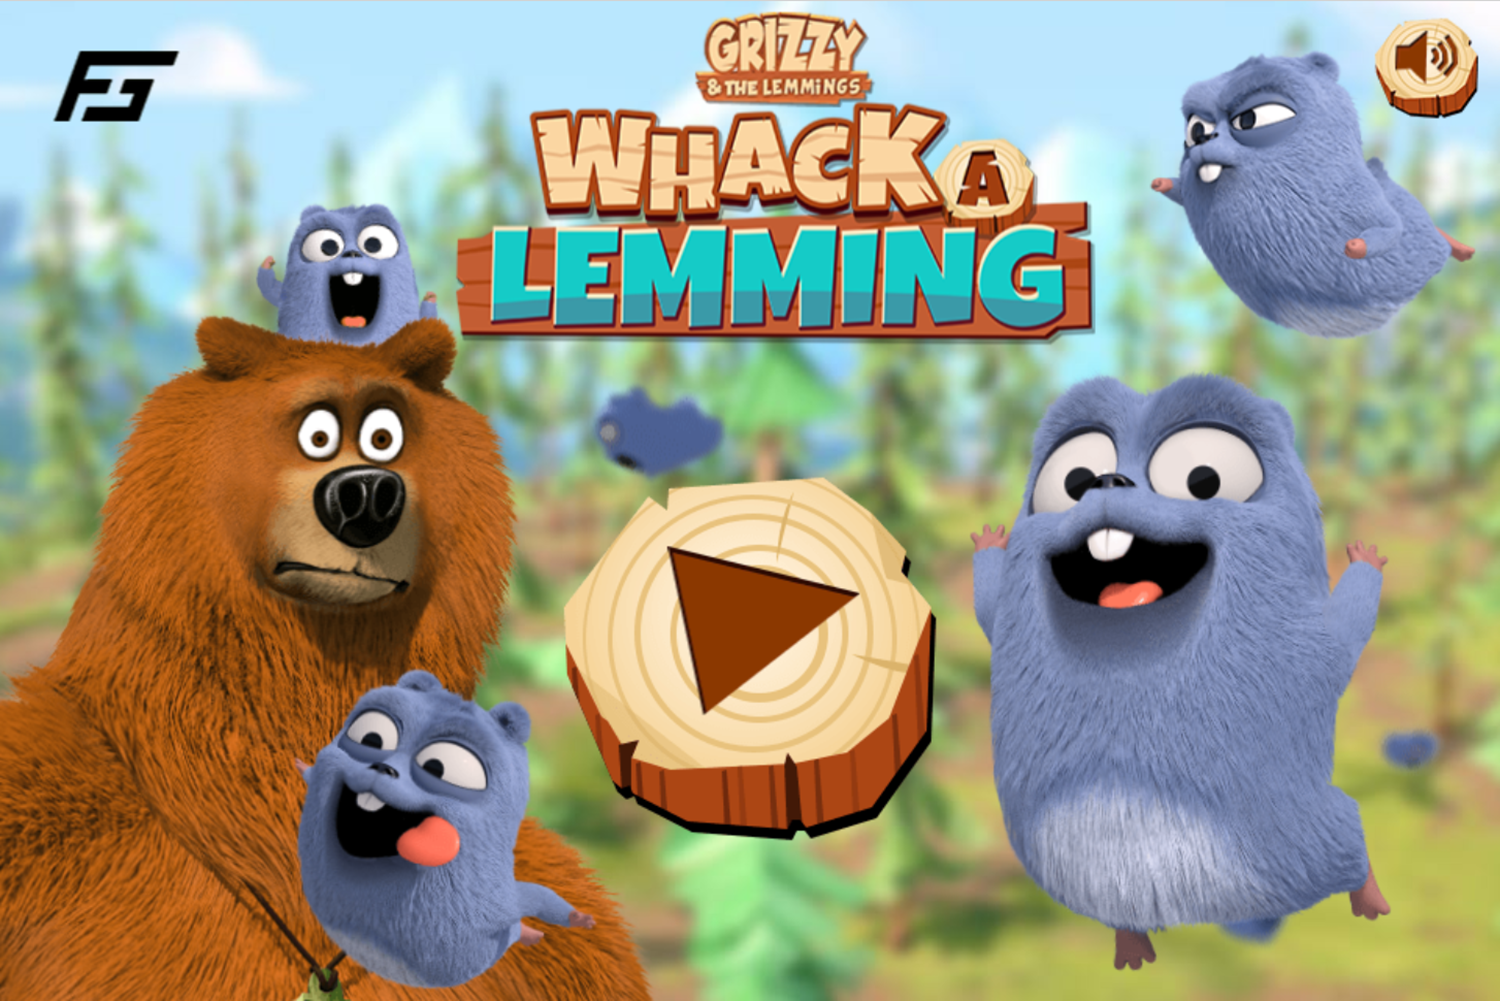 Grizzy and the Lemmings Whack a Lemming Game Welcome Screen Screenshot.